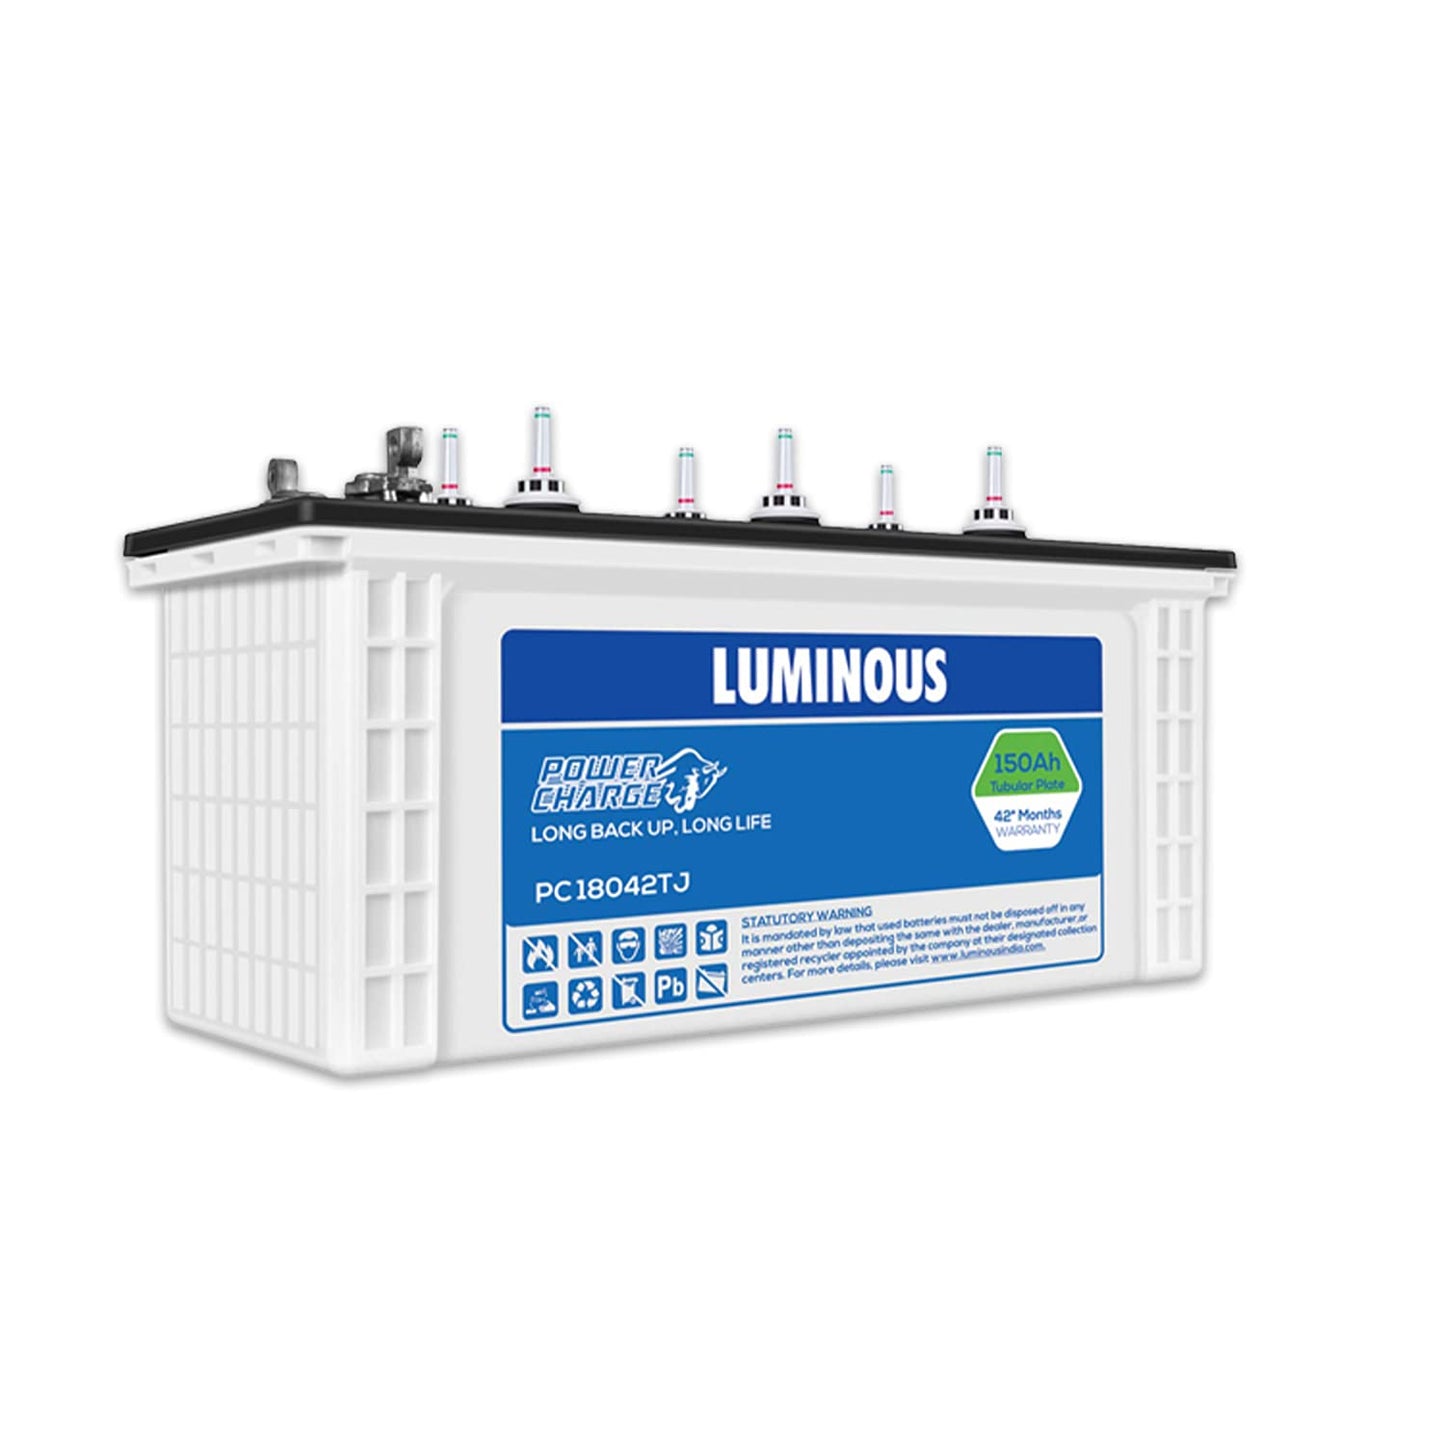 Luminous Power Charge PC 18042TJ 150 Ah Tall Jumbo Inverter Battery for Home, Office & Shops